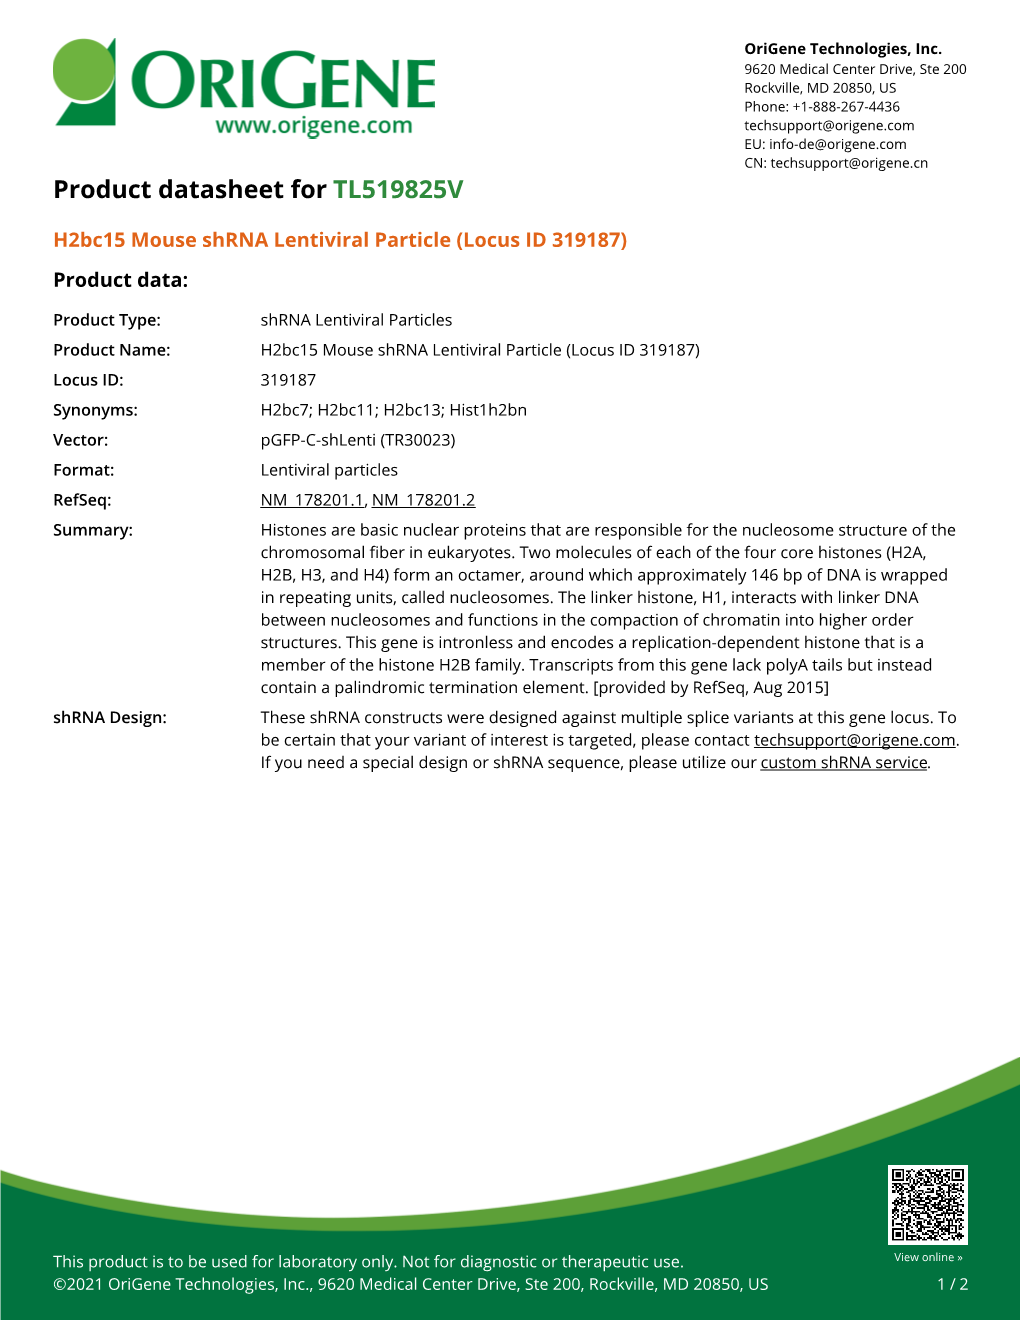 H2bc15 Mouse Shrna Lentiviral Particle (Locus ID 319187) Product Data